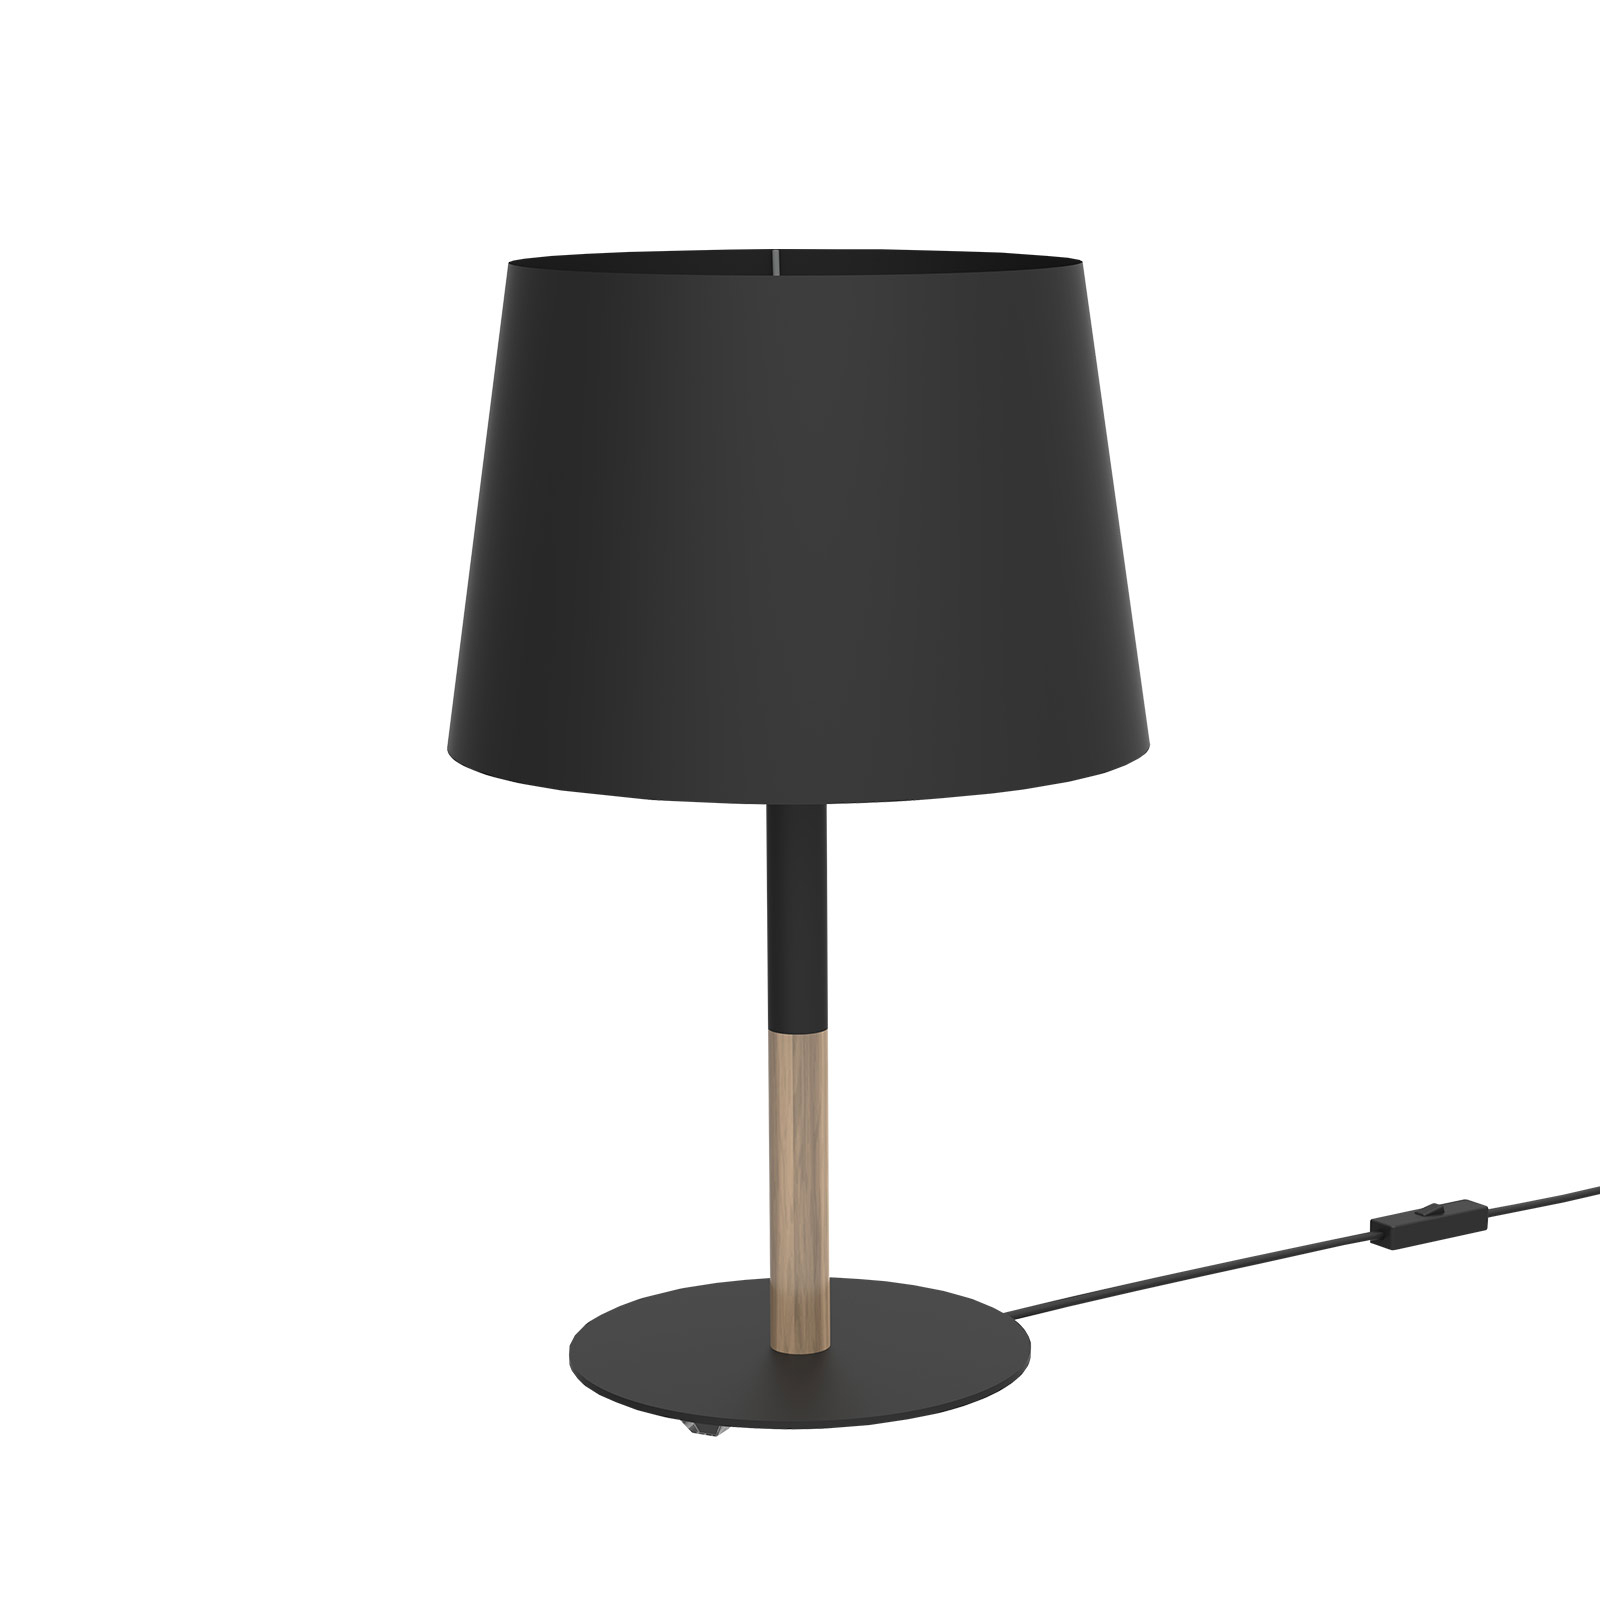 Mikado LT table lamp with fabric lampshade